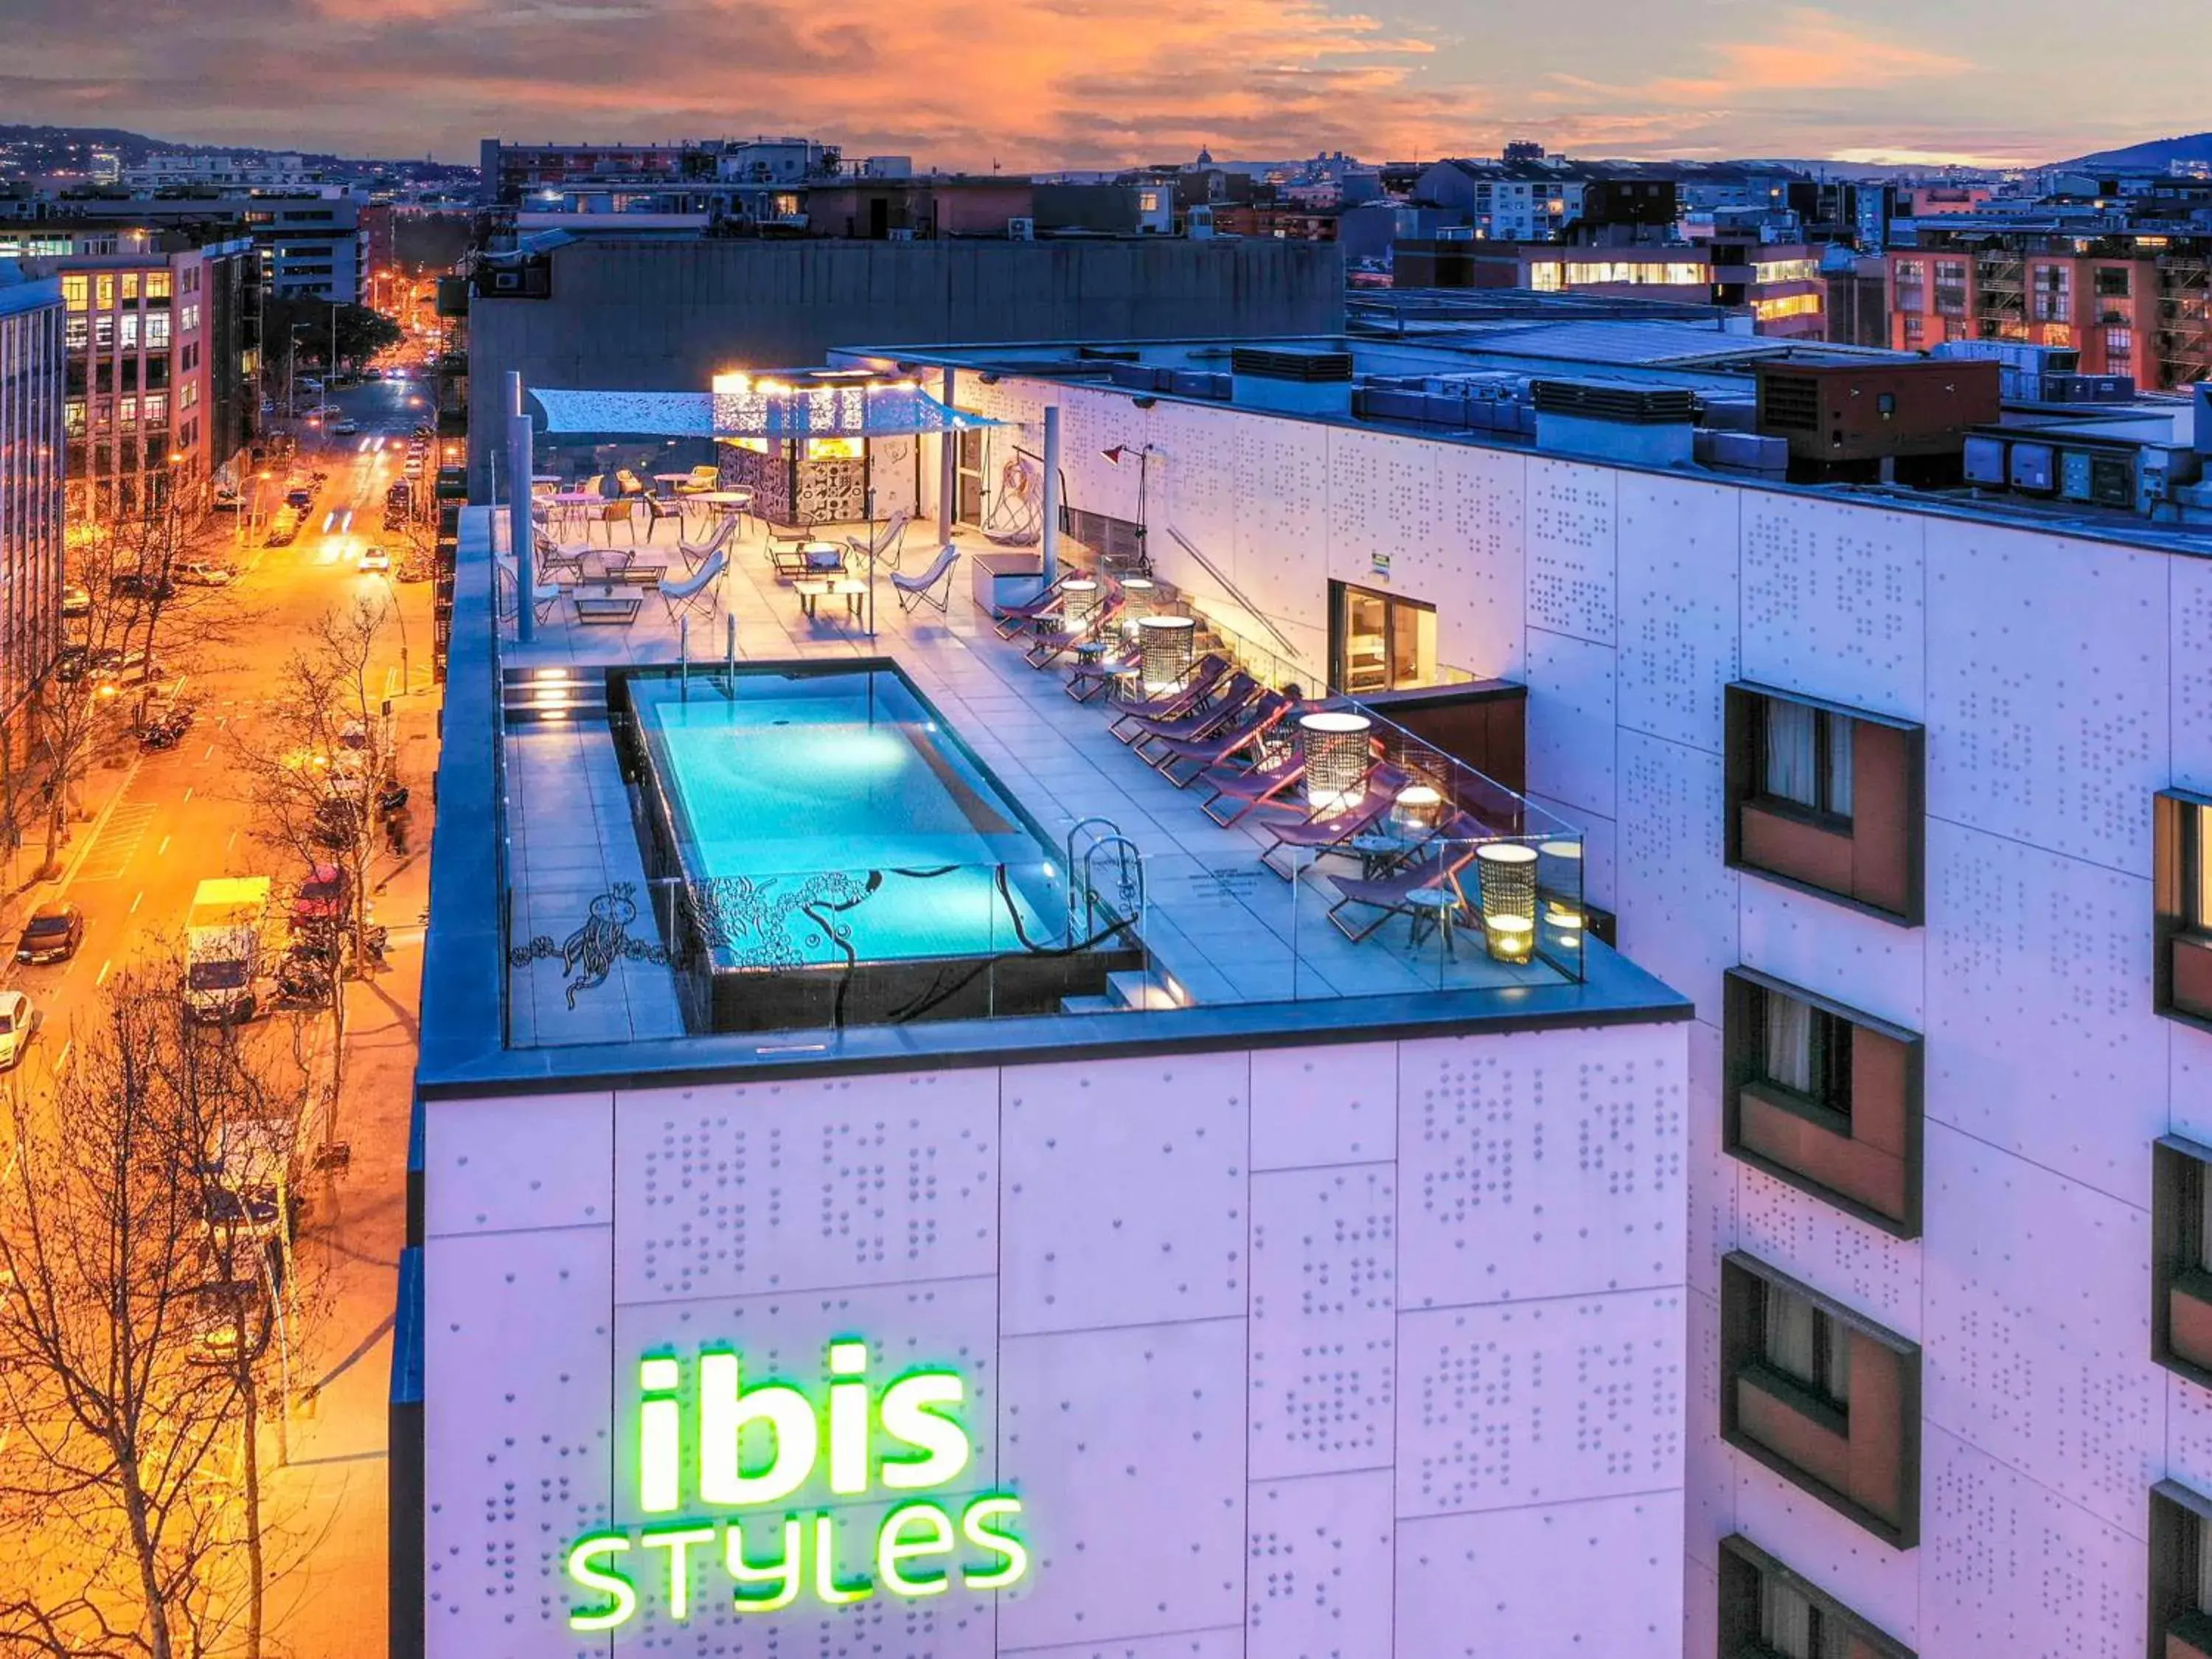 Property building, Pool View in ibis Styles Barcelona City Bogatell